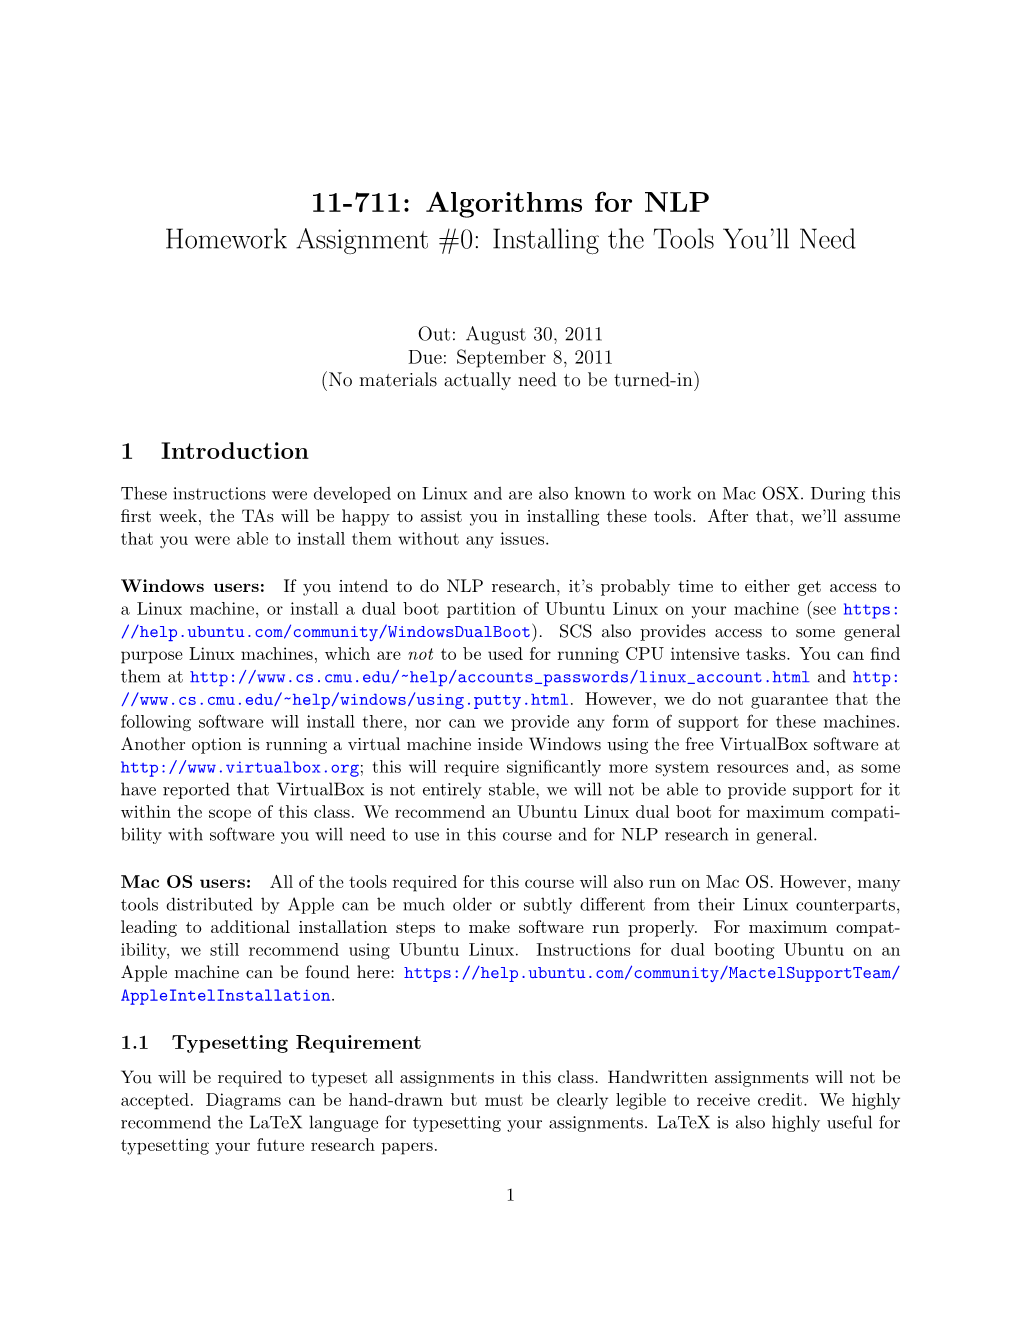 11-711: Algorithms for NLP Homework Assignment #0: Installing the Tools You’Ll Need